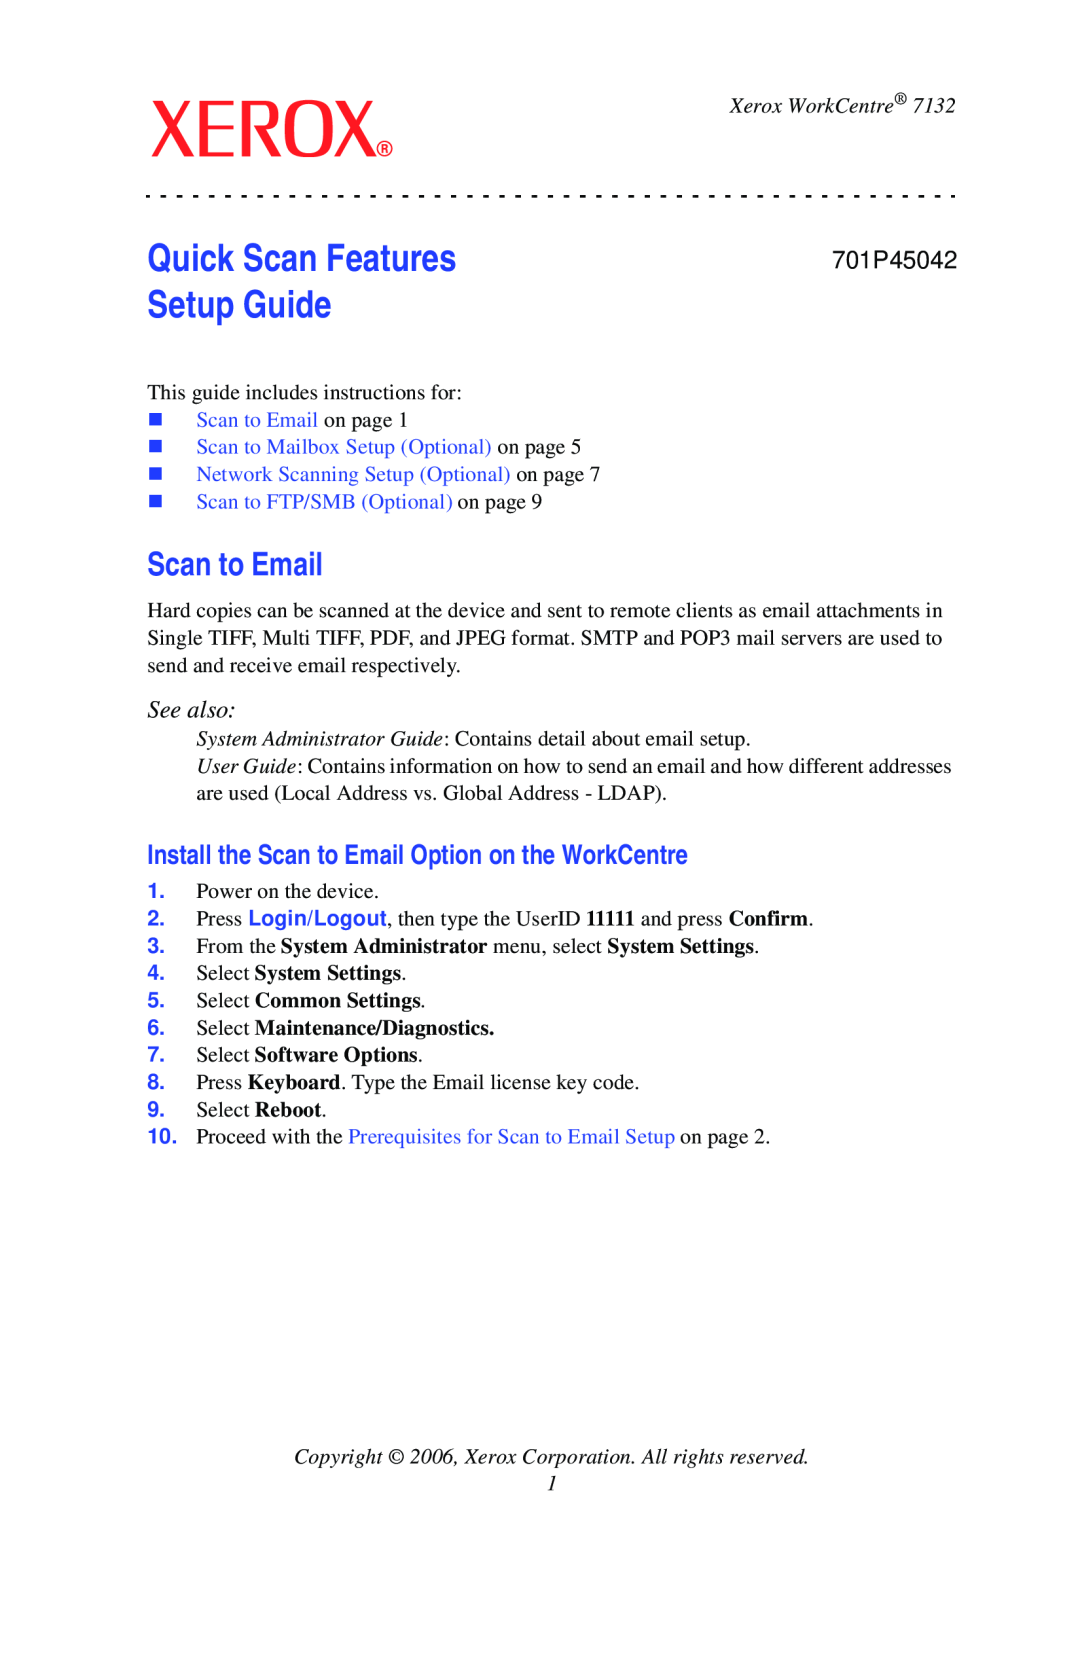 Xerox 7132 setup guide See also, Xerox WorkCentre, Select System Settings 5.Select Common Settings, Scan to Email 